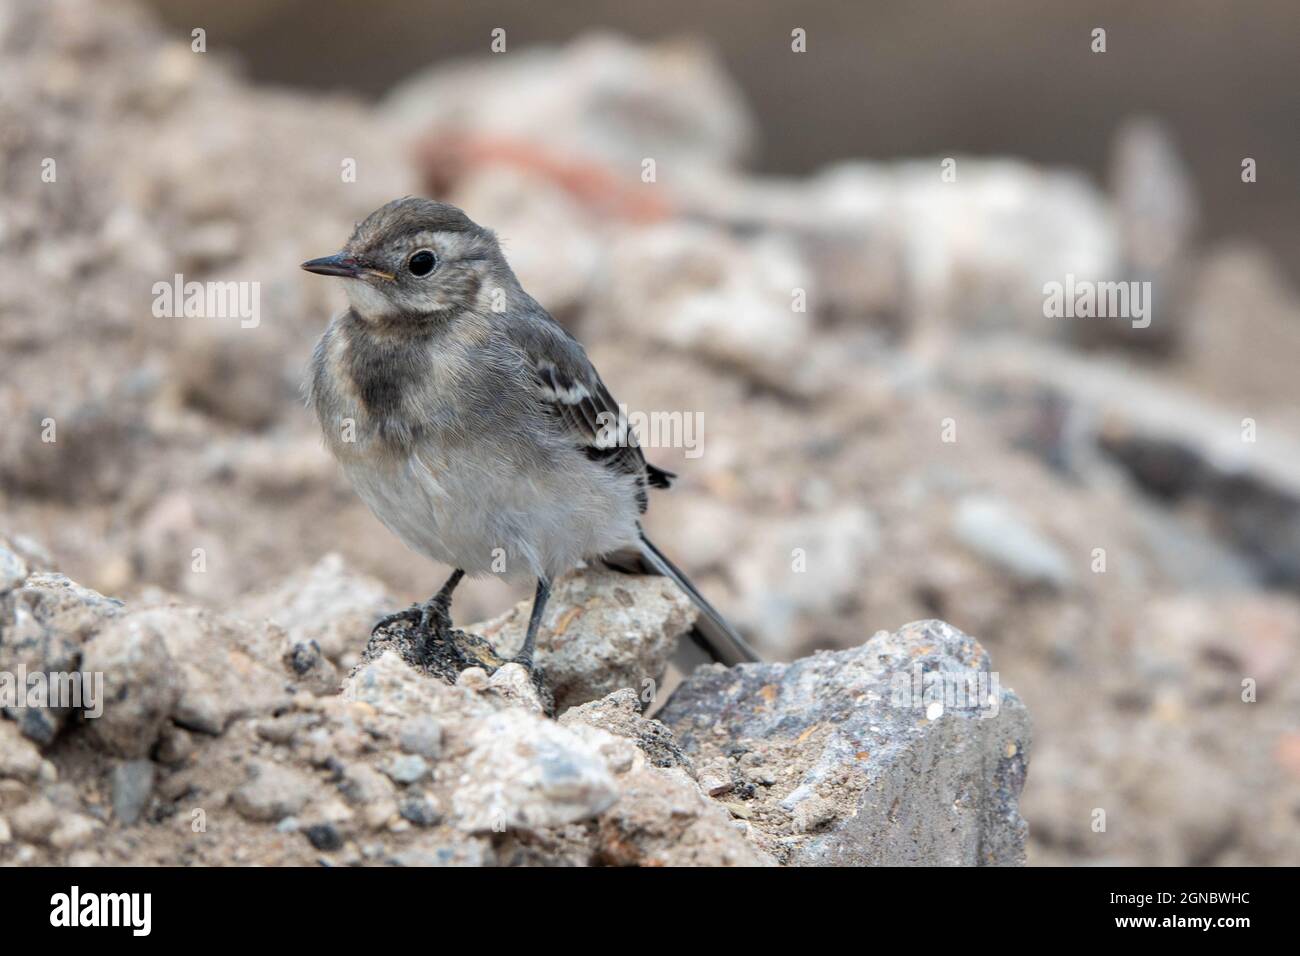 pretty young grey wagtail perched on some rubble Stock Photo